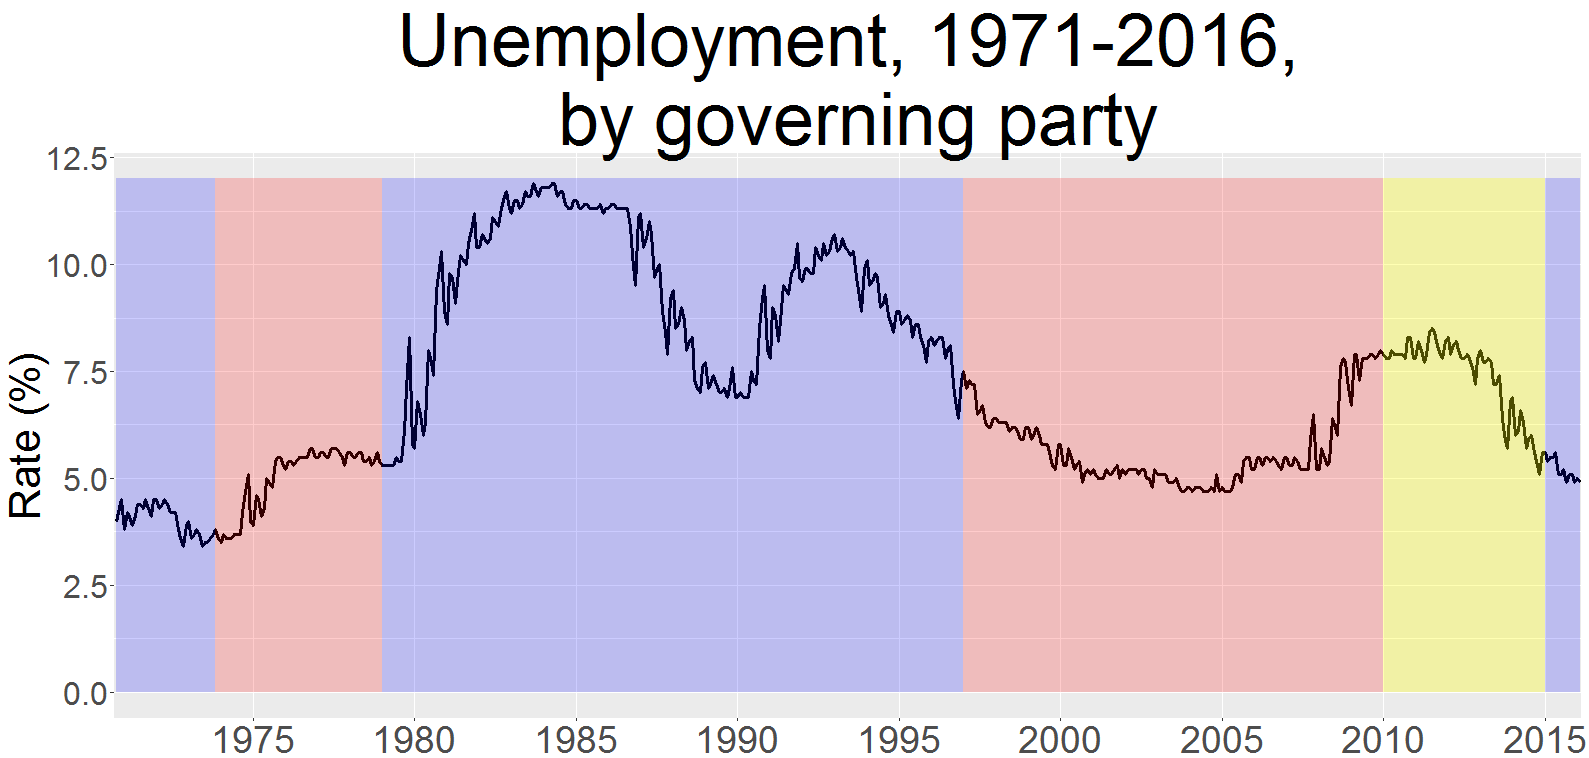 Is Unemployment Higher under Labour or the Conservatives?